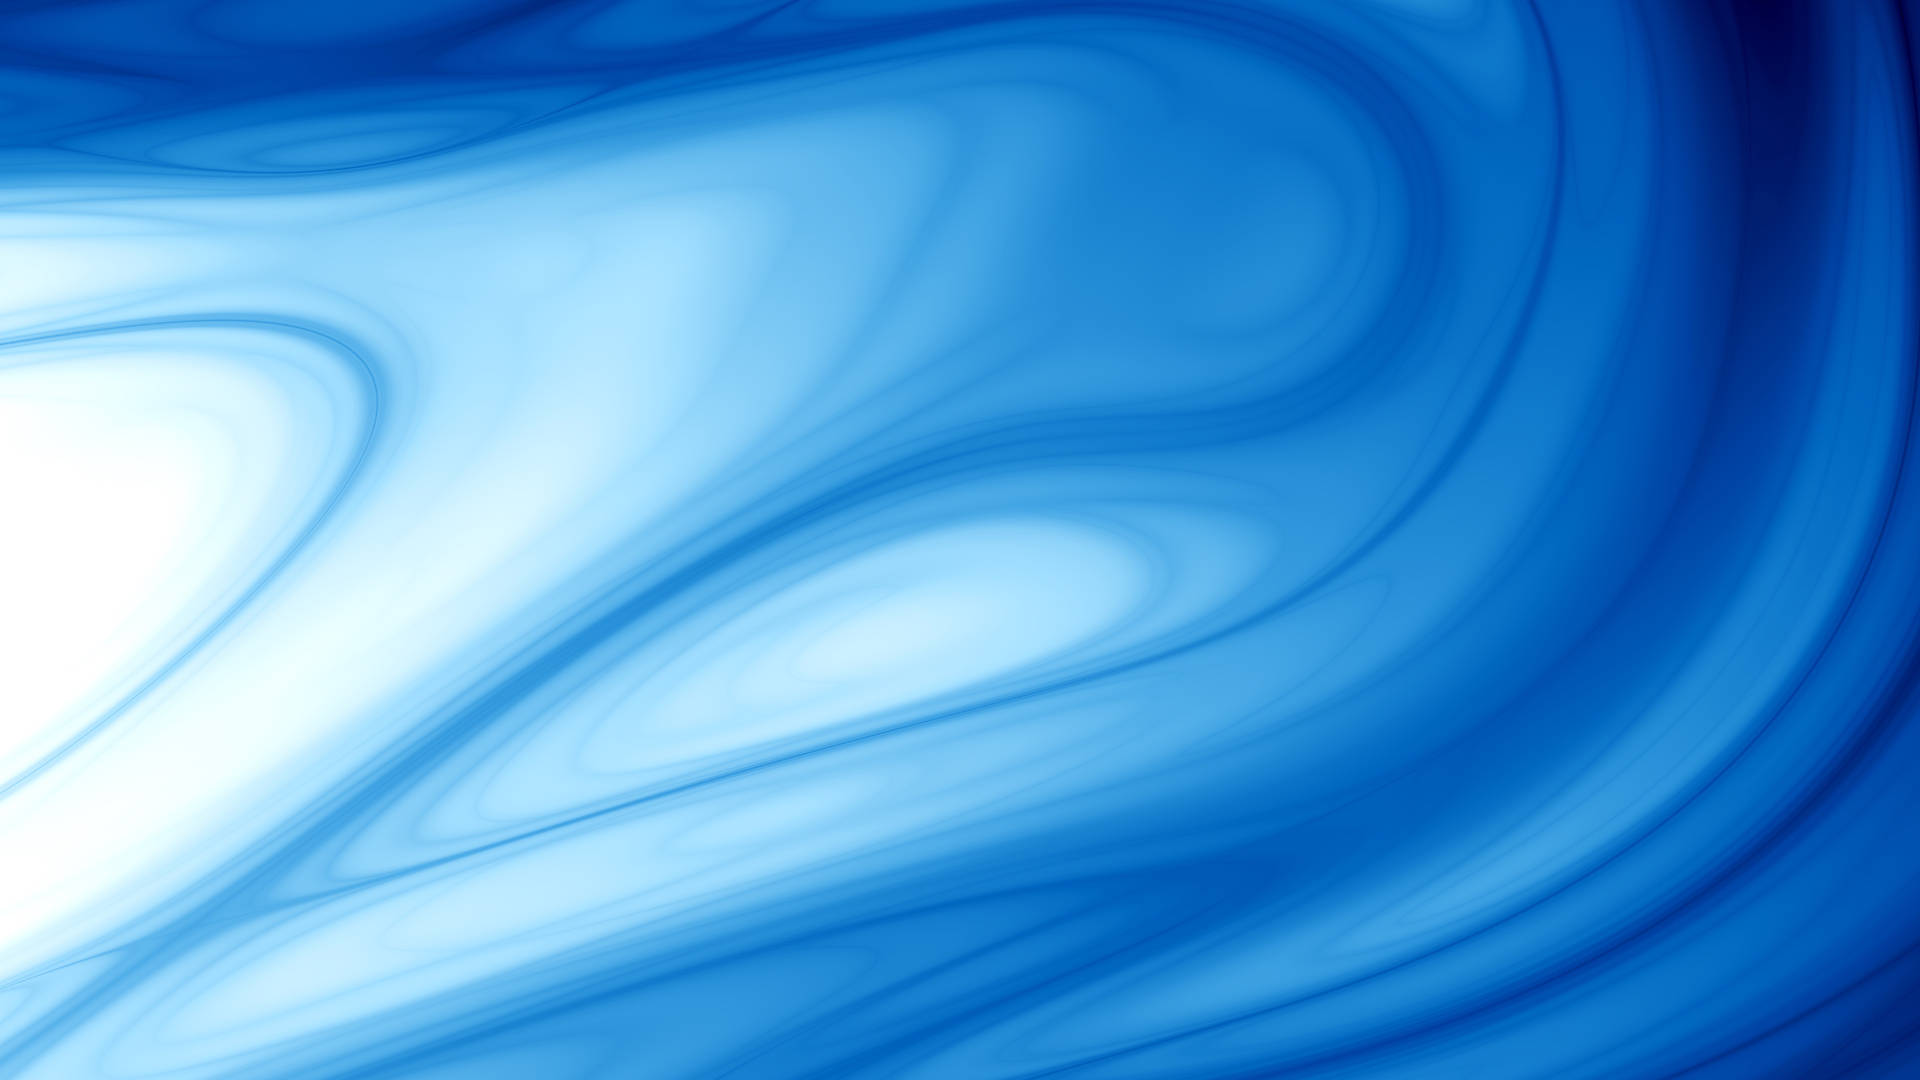 8k Ultra Hd Abstract Swirly Waves Background